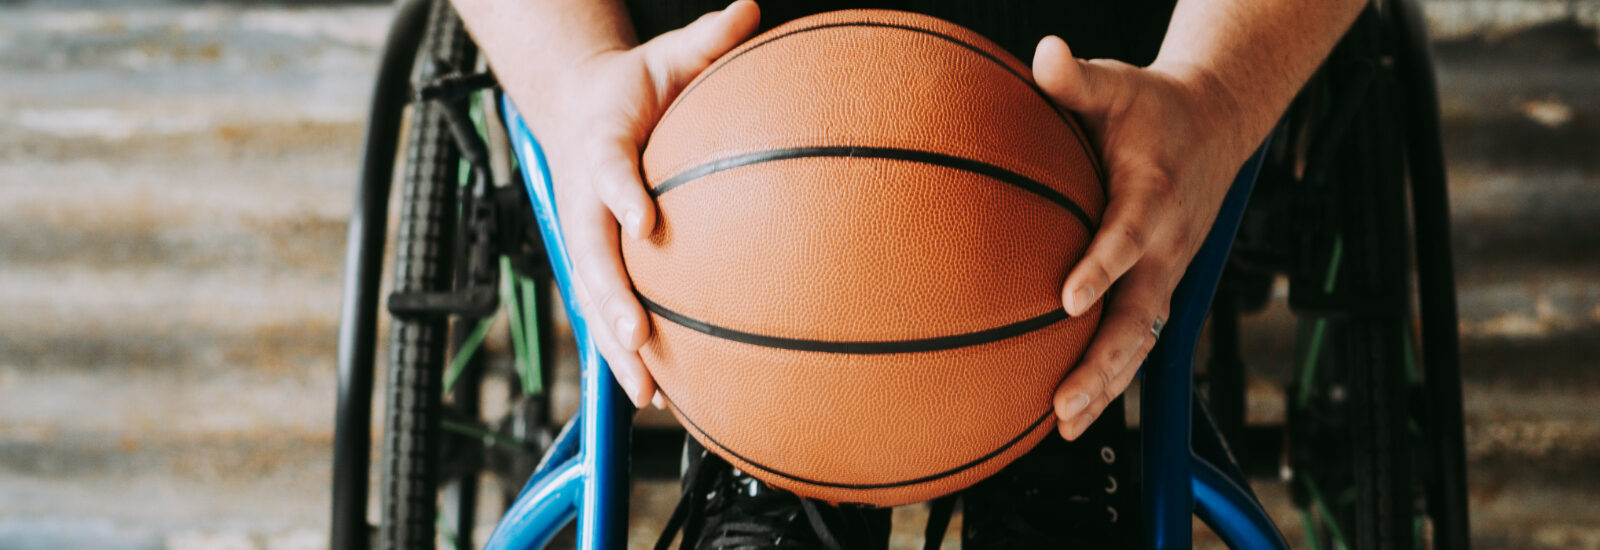 A person in a wheelchair holding a basketball